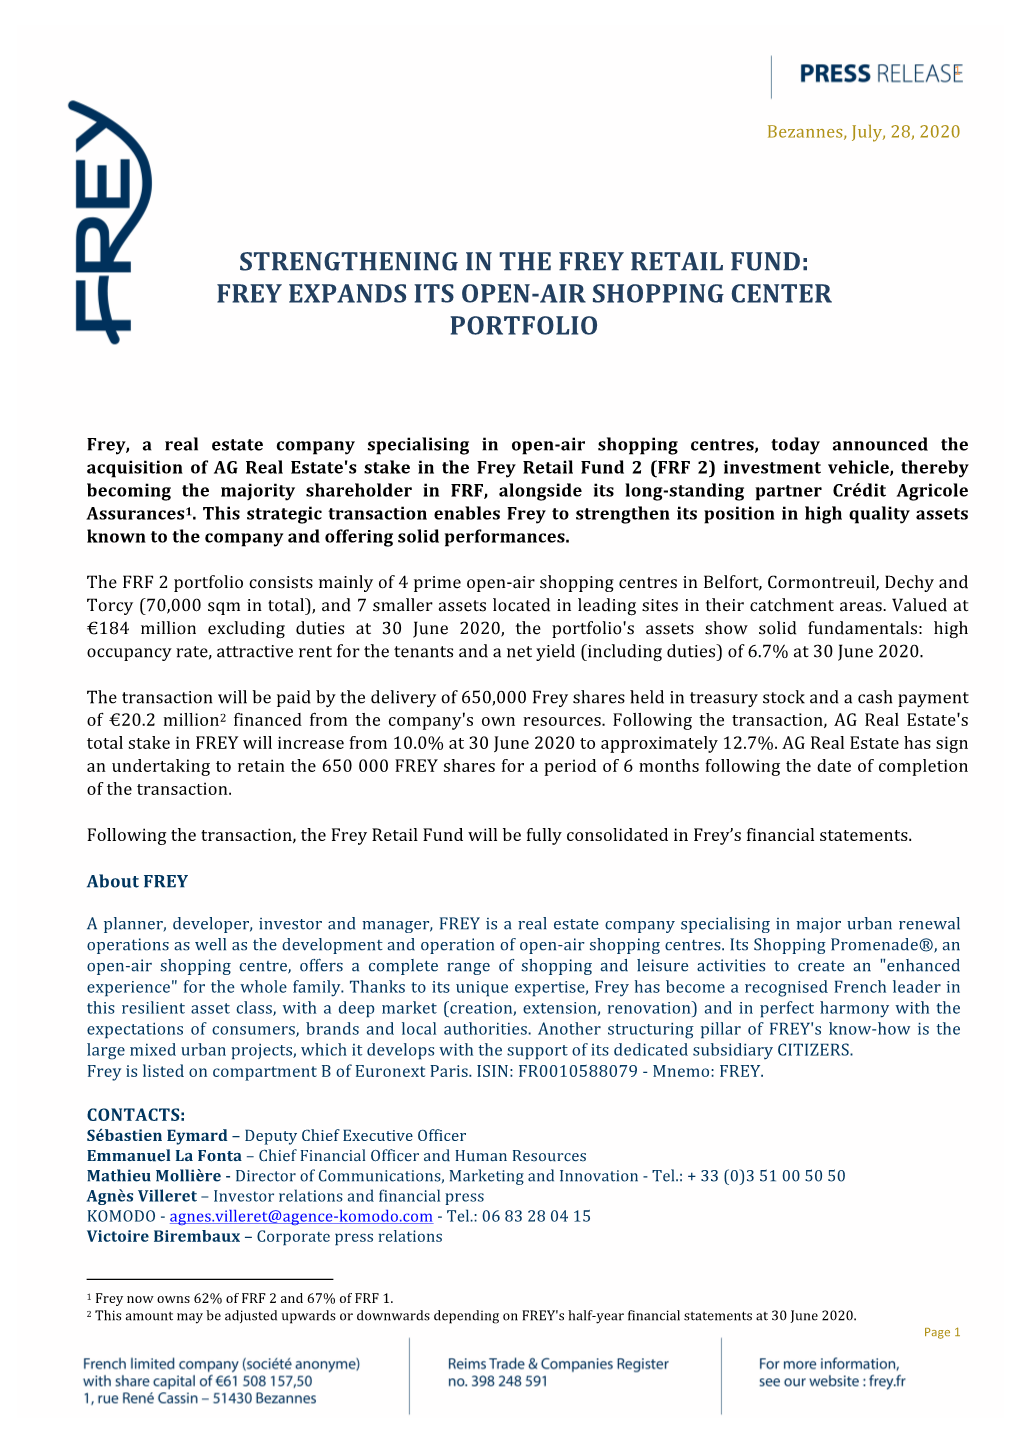 Strengthening in the Frey Retail Fund: Frey Expands Its Open-Air Shopping Center Portfolio